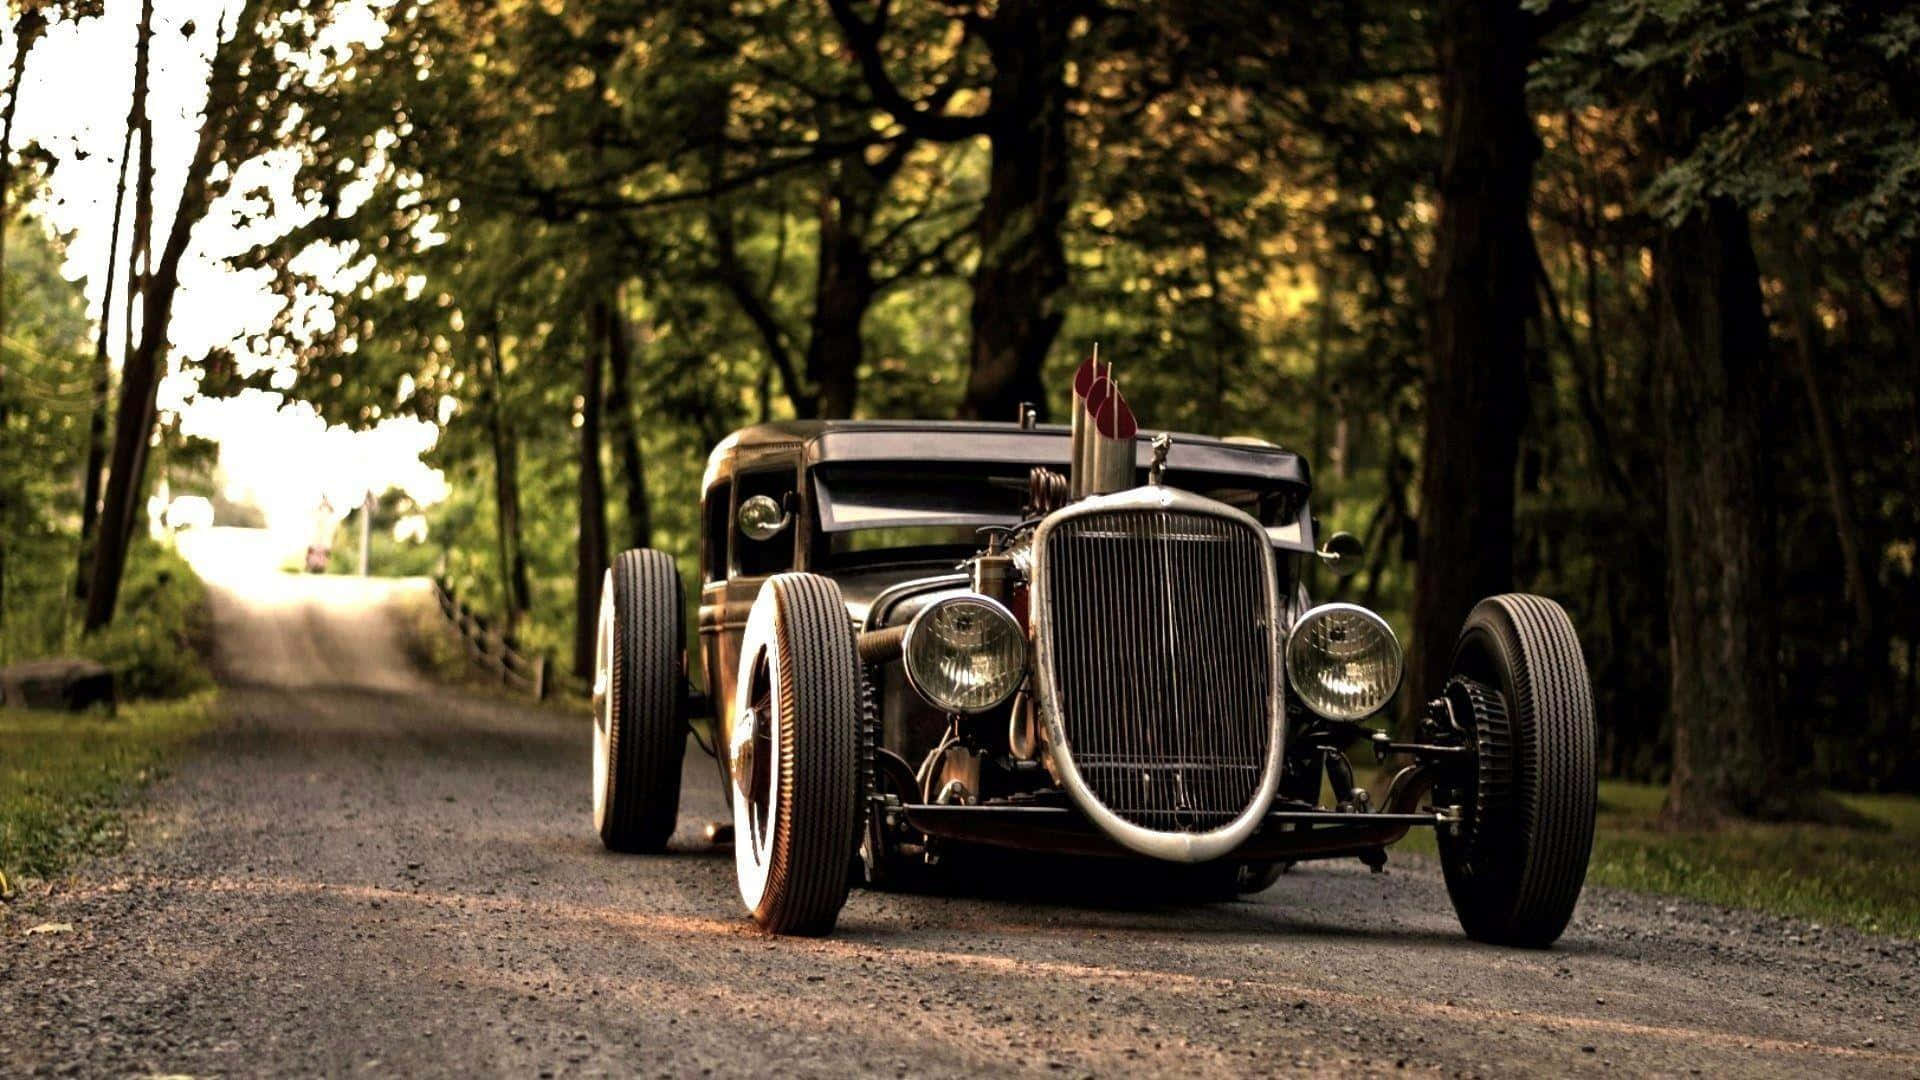 Feel the freedom with this classic Hot Rod Wallpaper